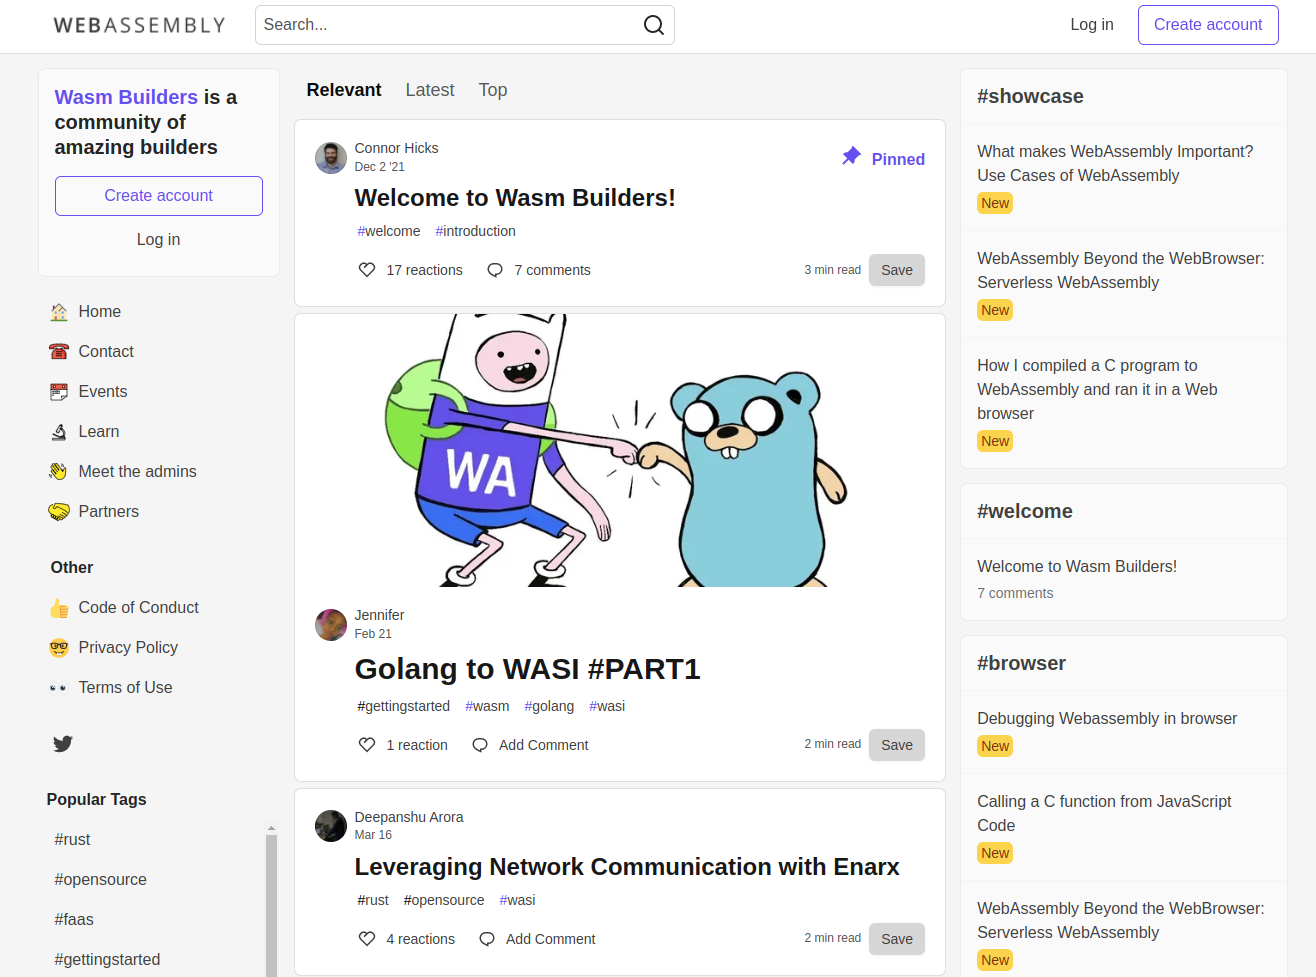 Enarx and the WebAssembly ecosystem